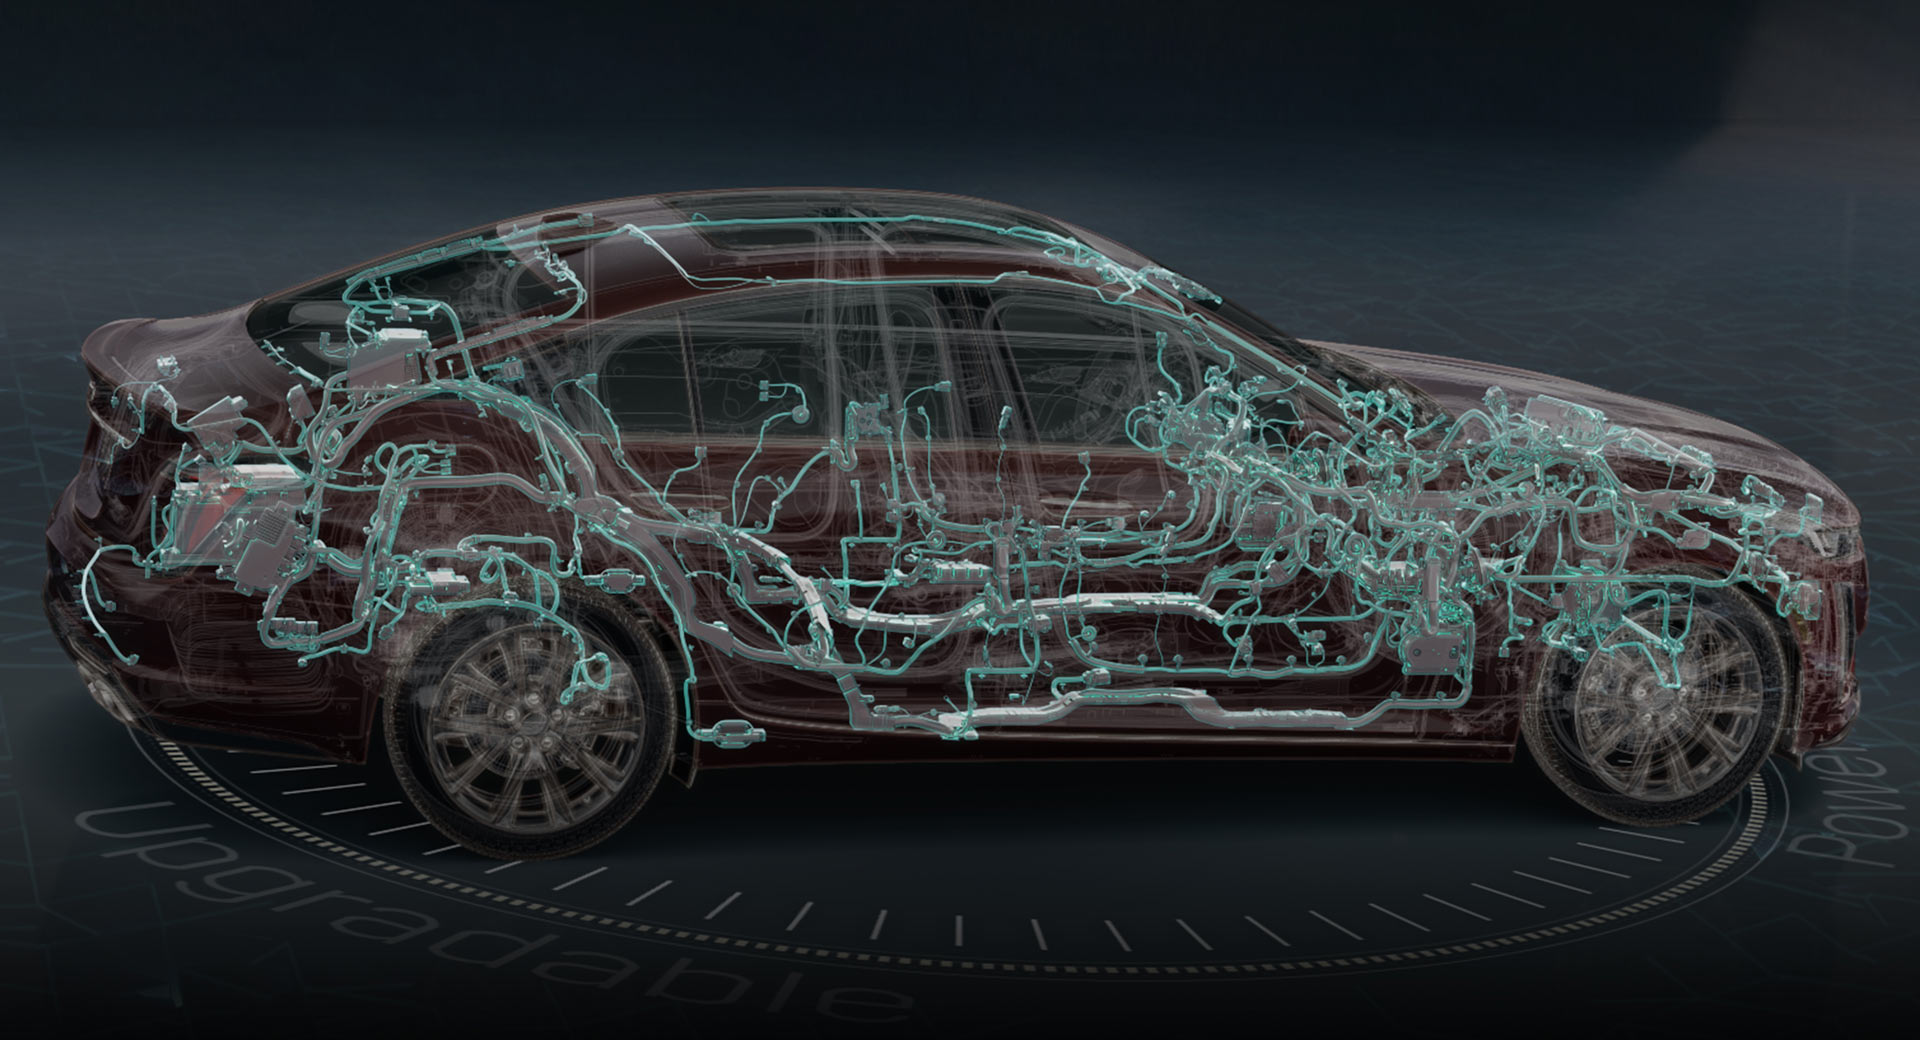 GM’s New Electrical Architecture Handles Up To 4.5 Terabytes Of Data